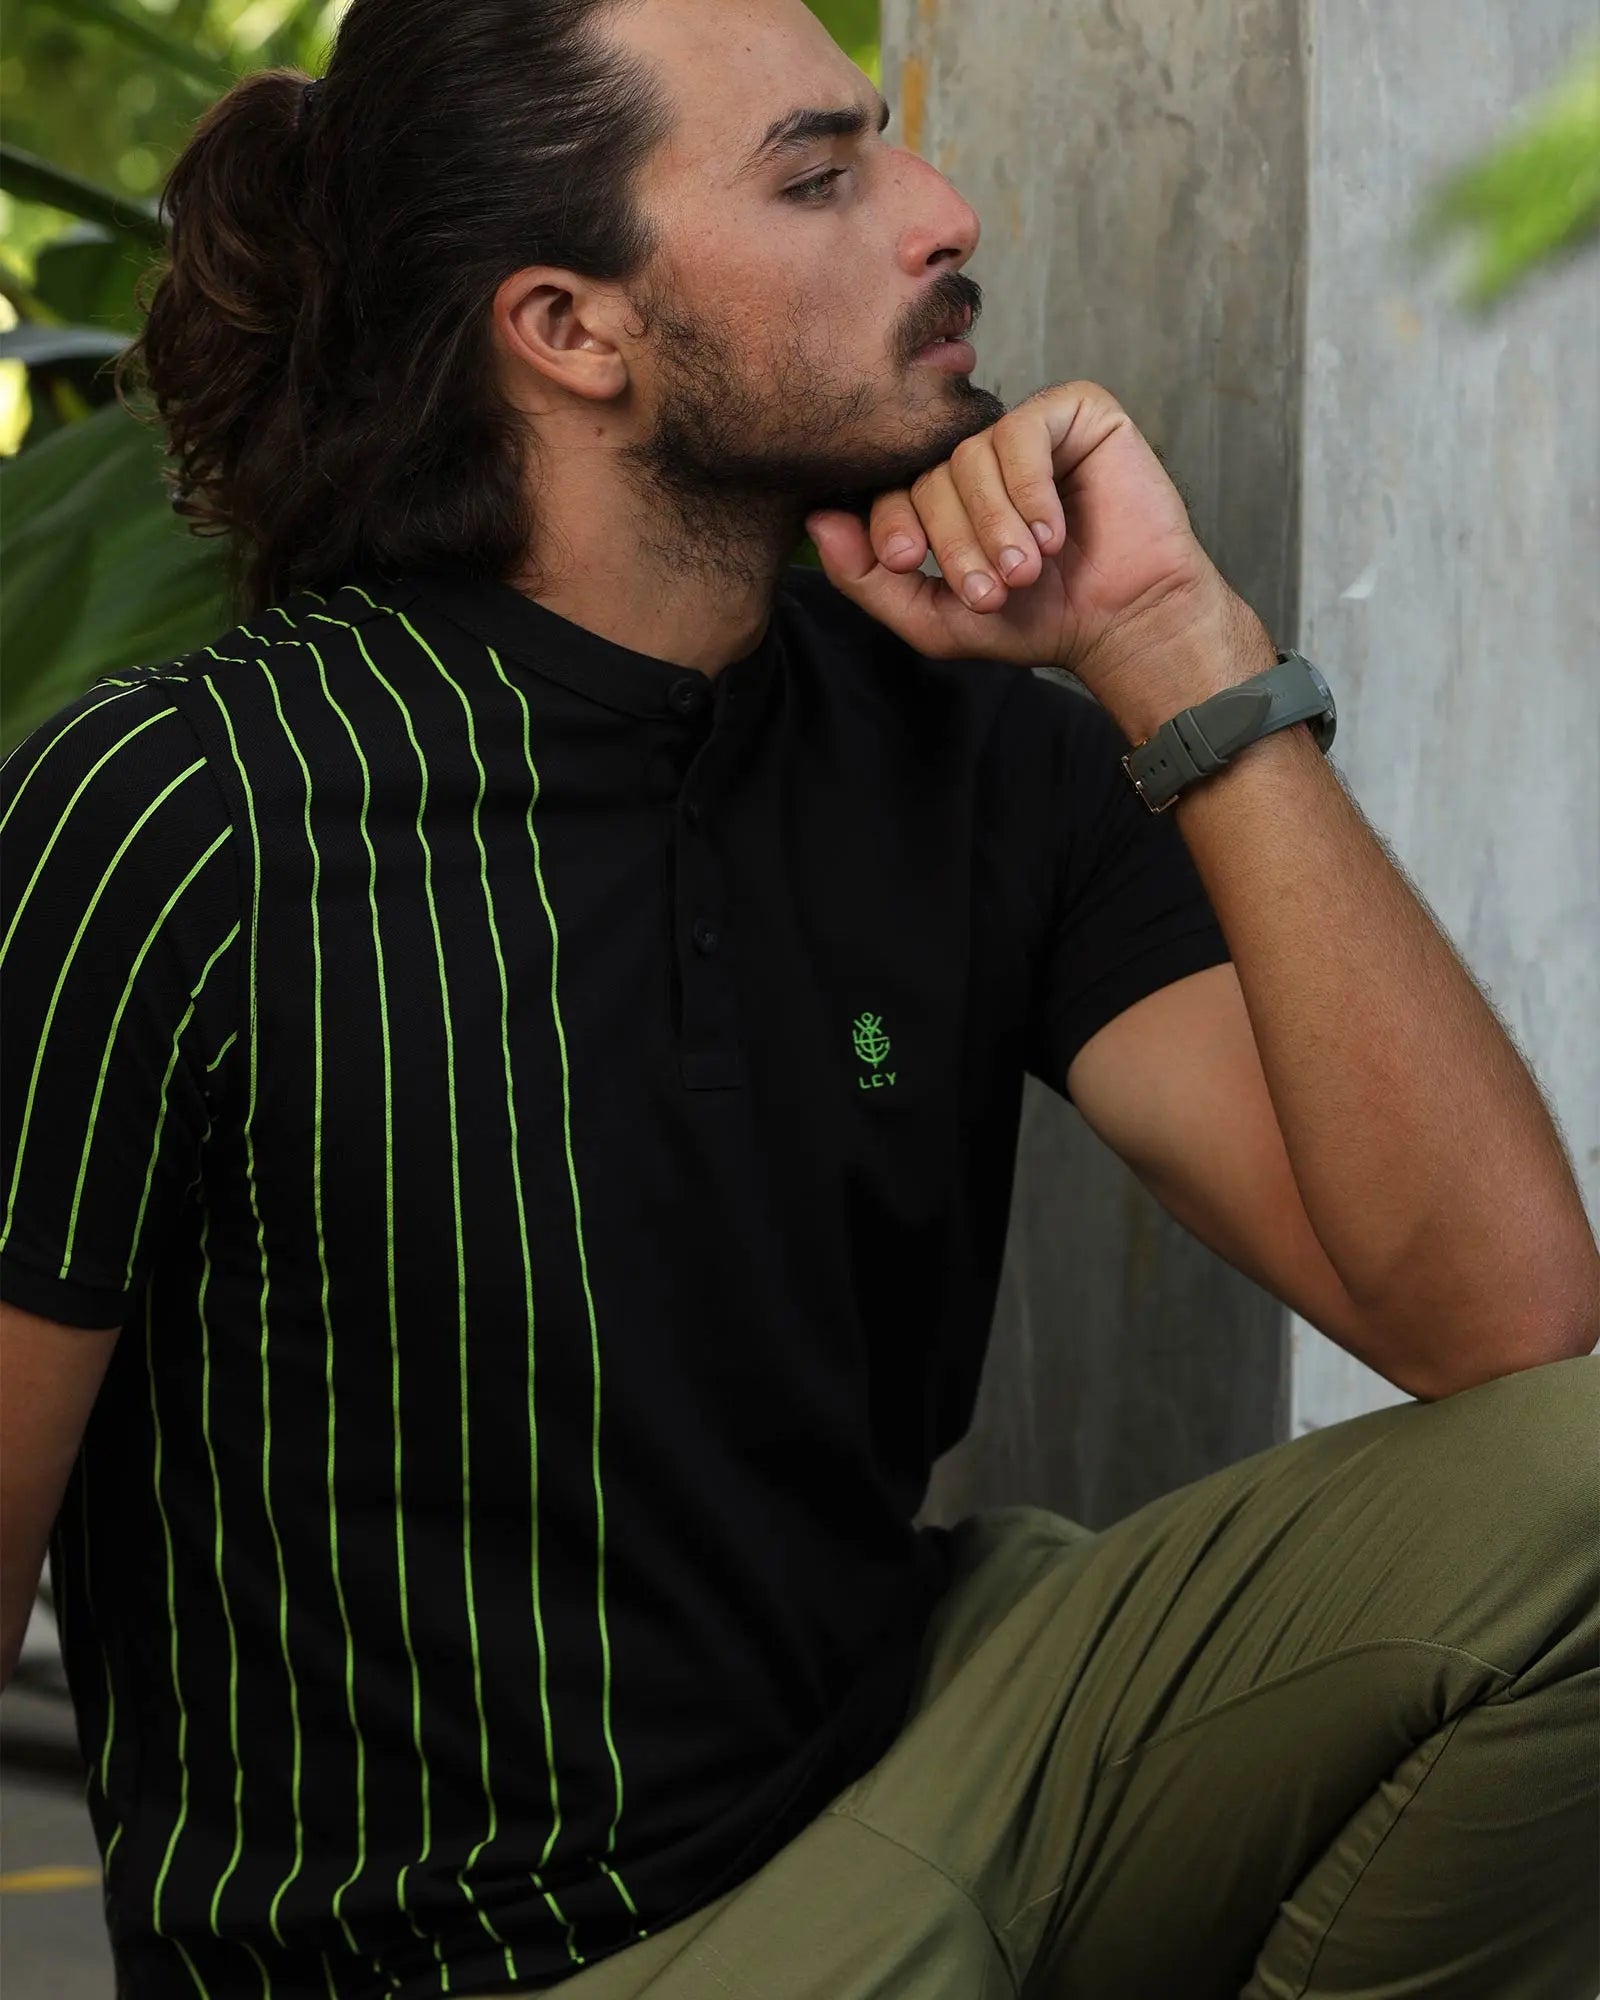 LCY London | Capsule Collection - Contrasting Vertical Striped Men's Mandarin Polo LCY London